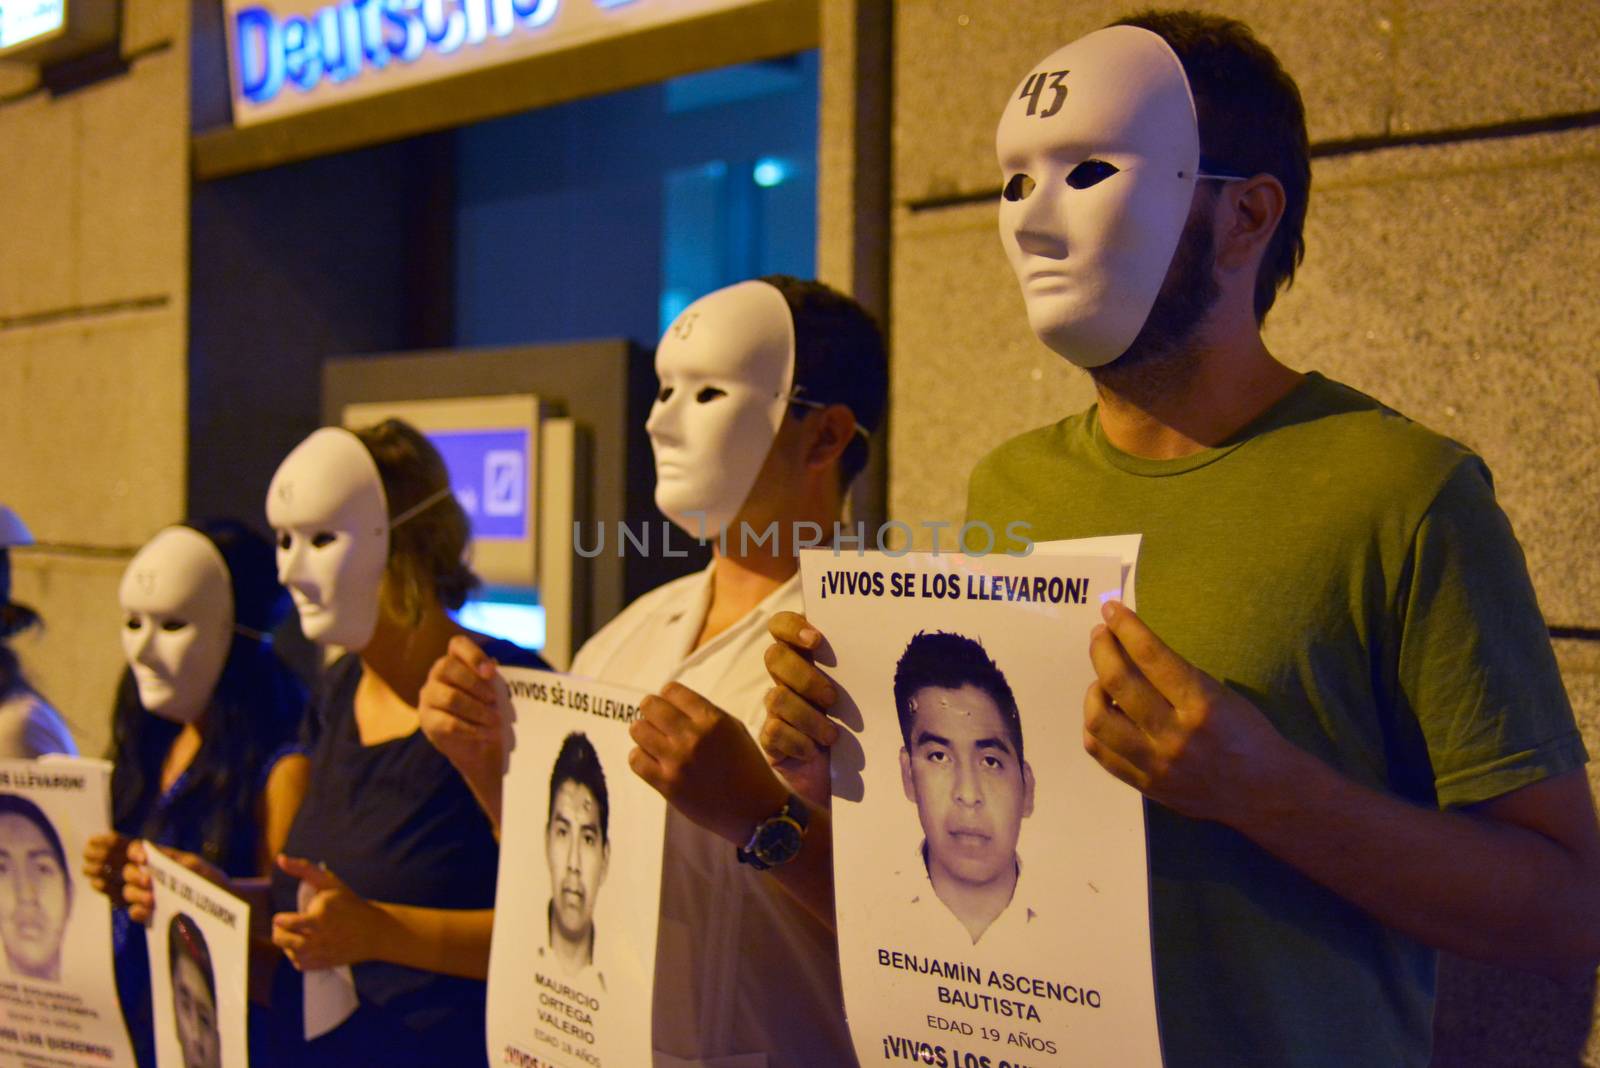 SPAIN, Madrid: Protesters wearing white masks rally outside the Embassy of Mexico in Madrid, Spain on September 25, 2015, while holding up signs displaying photographs of missing Mexican students who disappeared in Iguala, Mexico on September 26 last year. Forty-six students who attended Ayotzinapa Rural Teachers' College went missing with the circumstances surrounding their disappearance still unclear